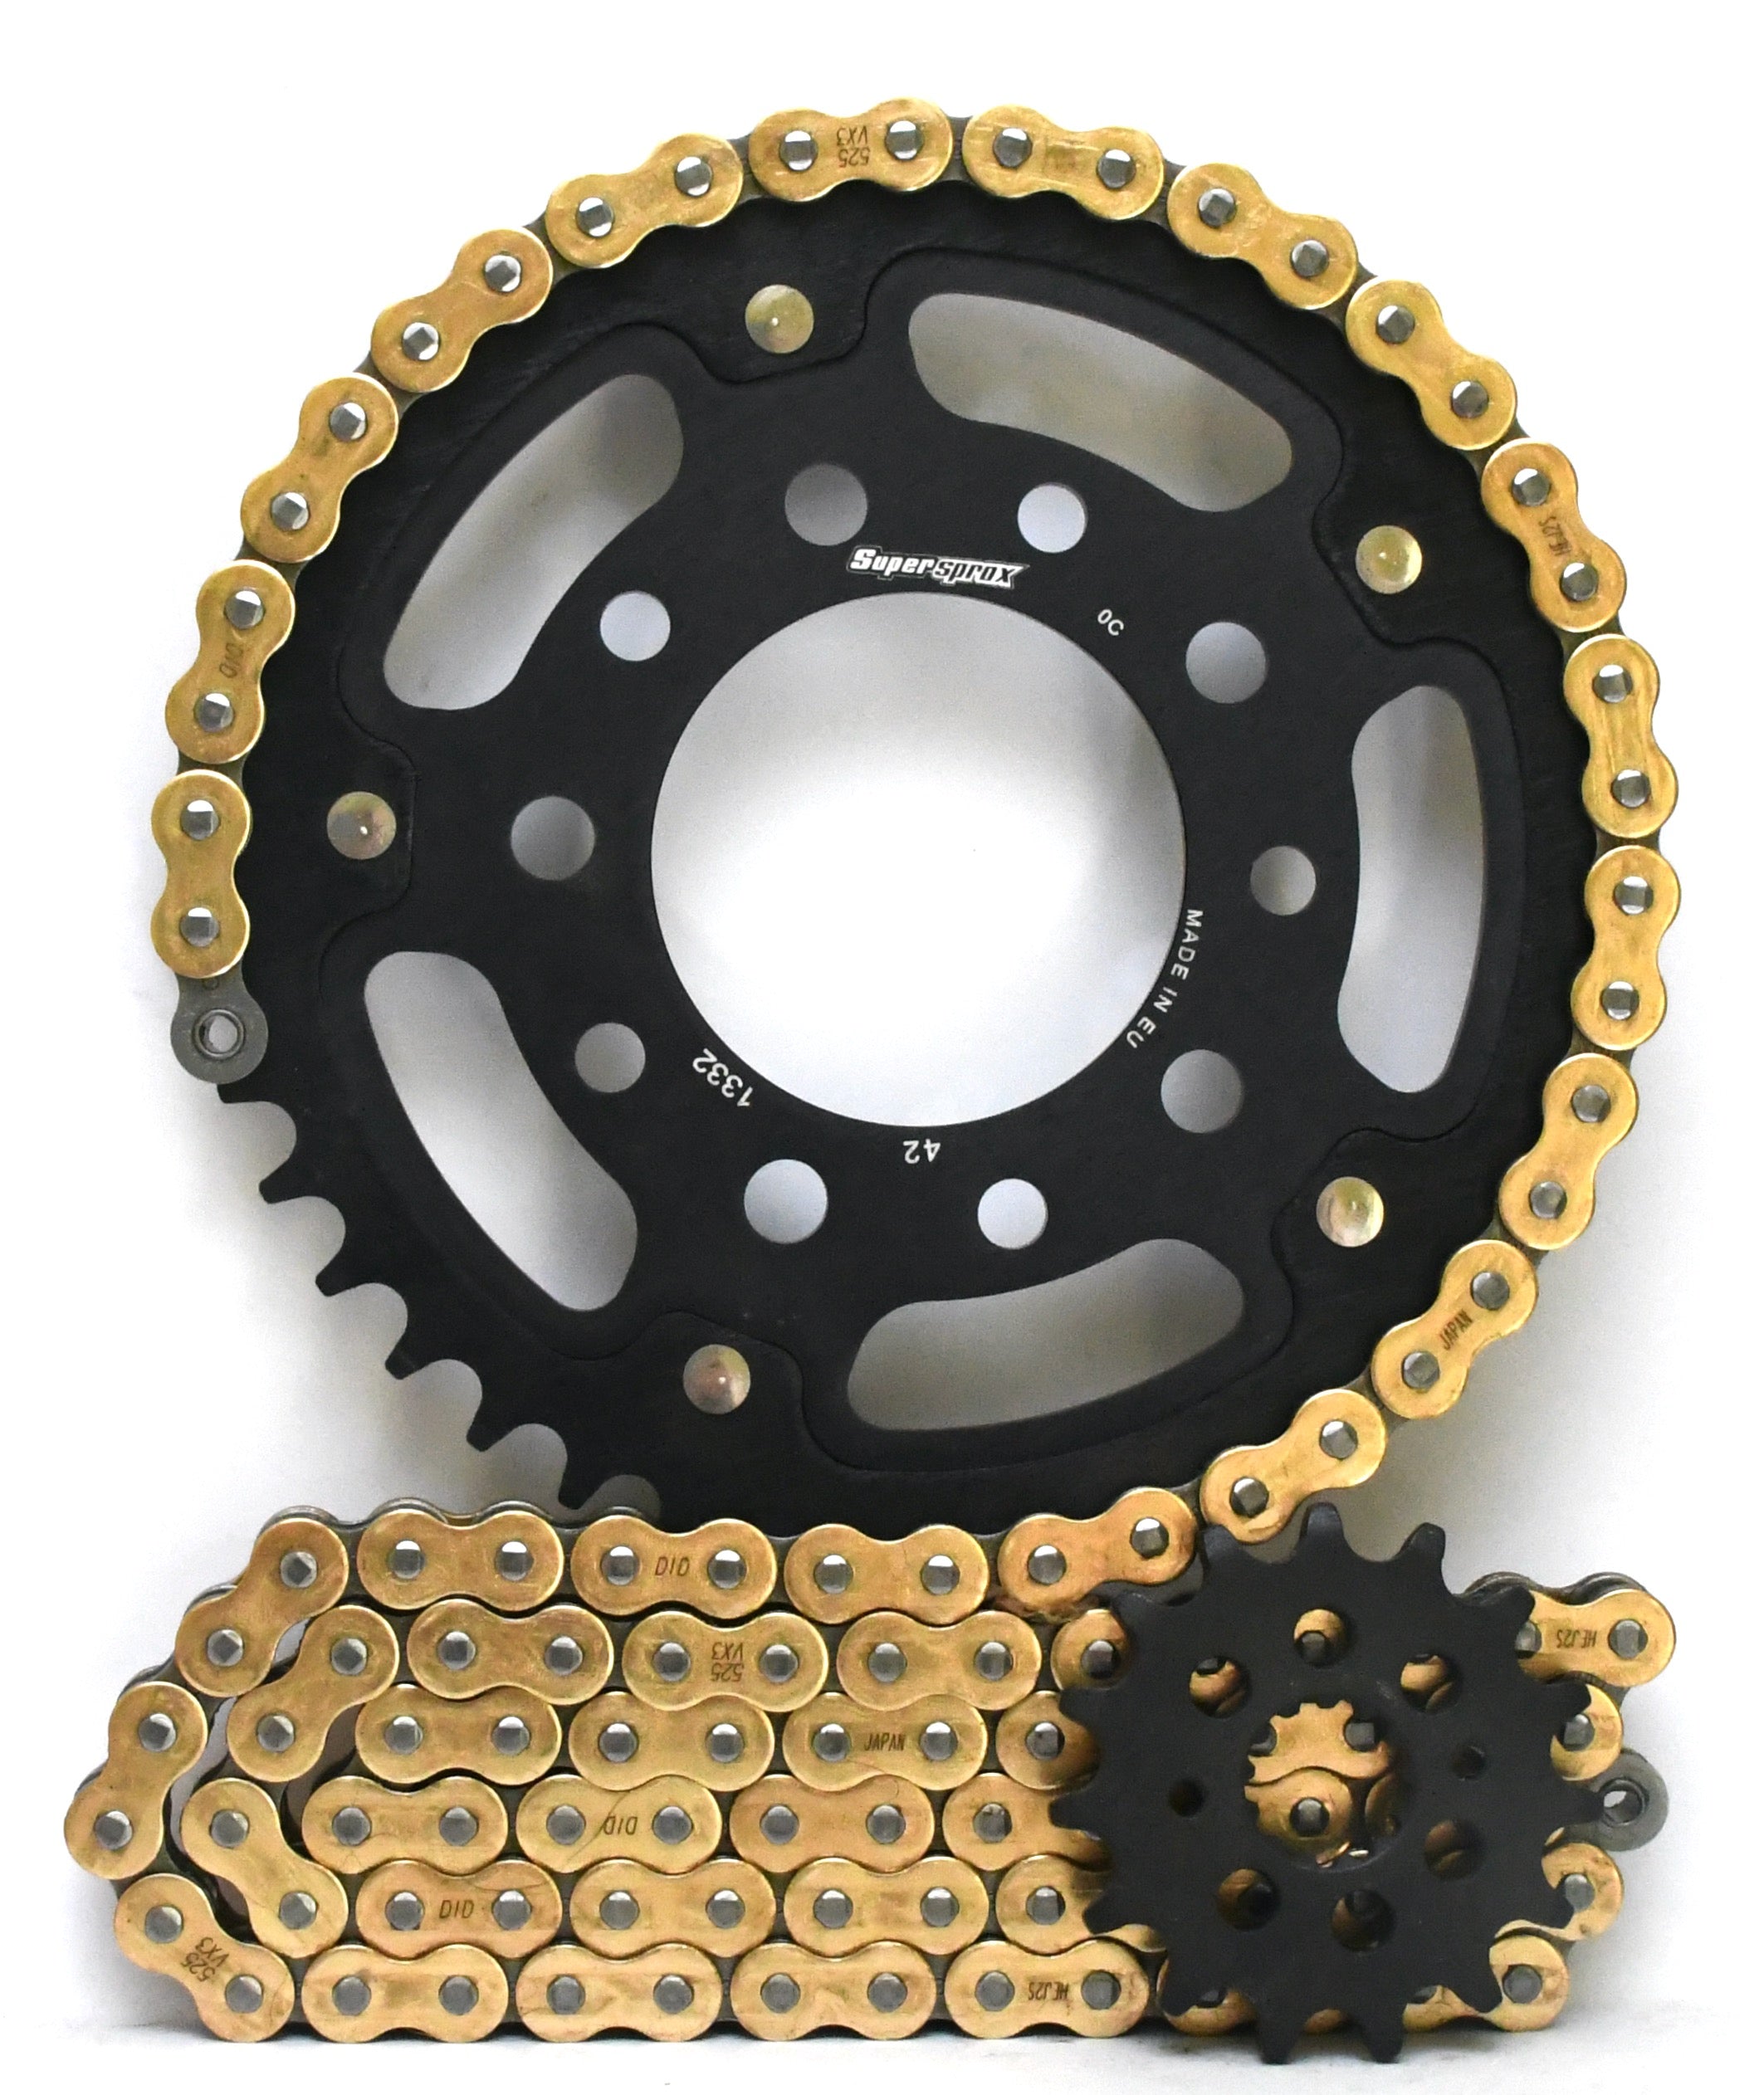 Supersprox Stealth Chain & Sprocket Kit for Triumph America 800 2002-2006 - Standard Gearing